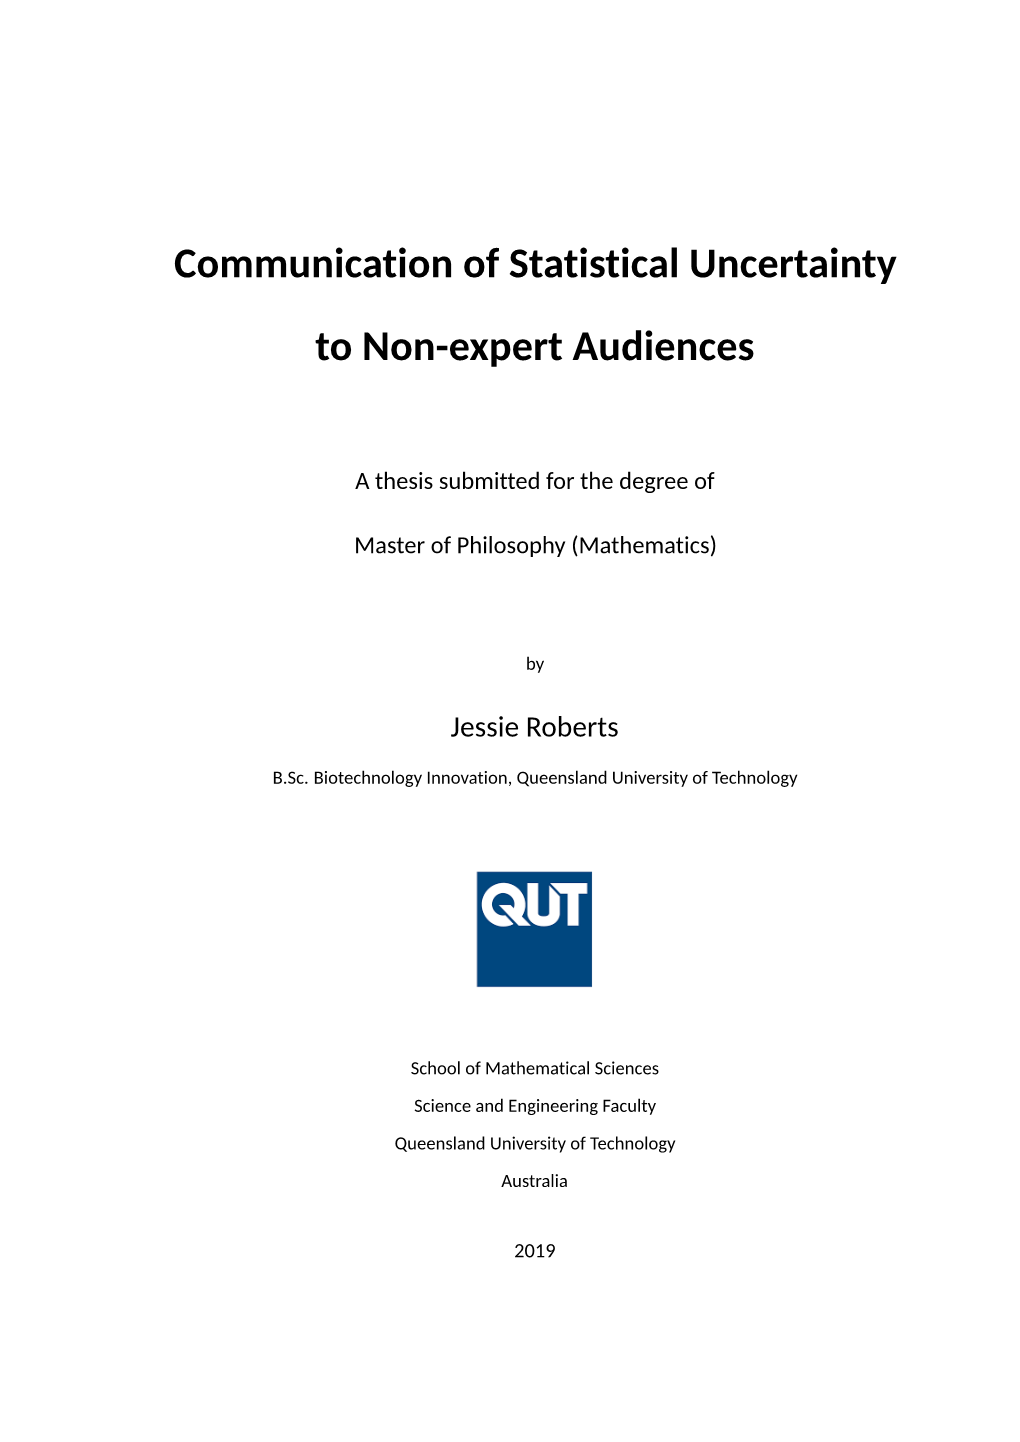 Communication of Statistical Uncertainty to Non-Expert Audiences